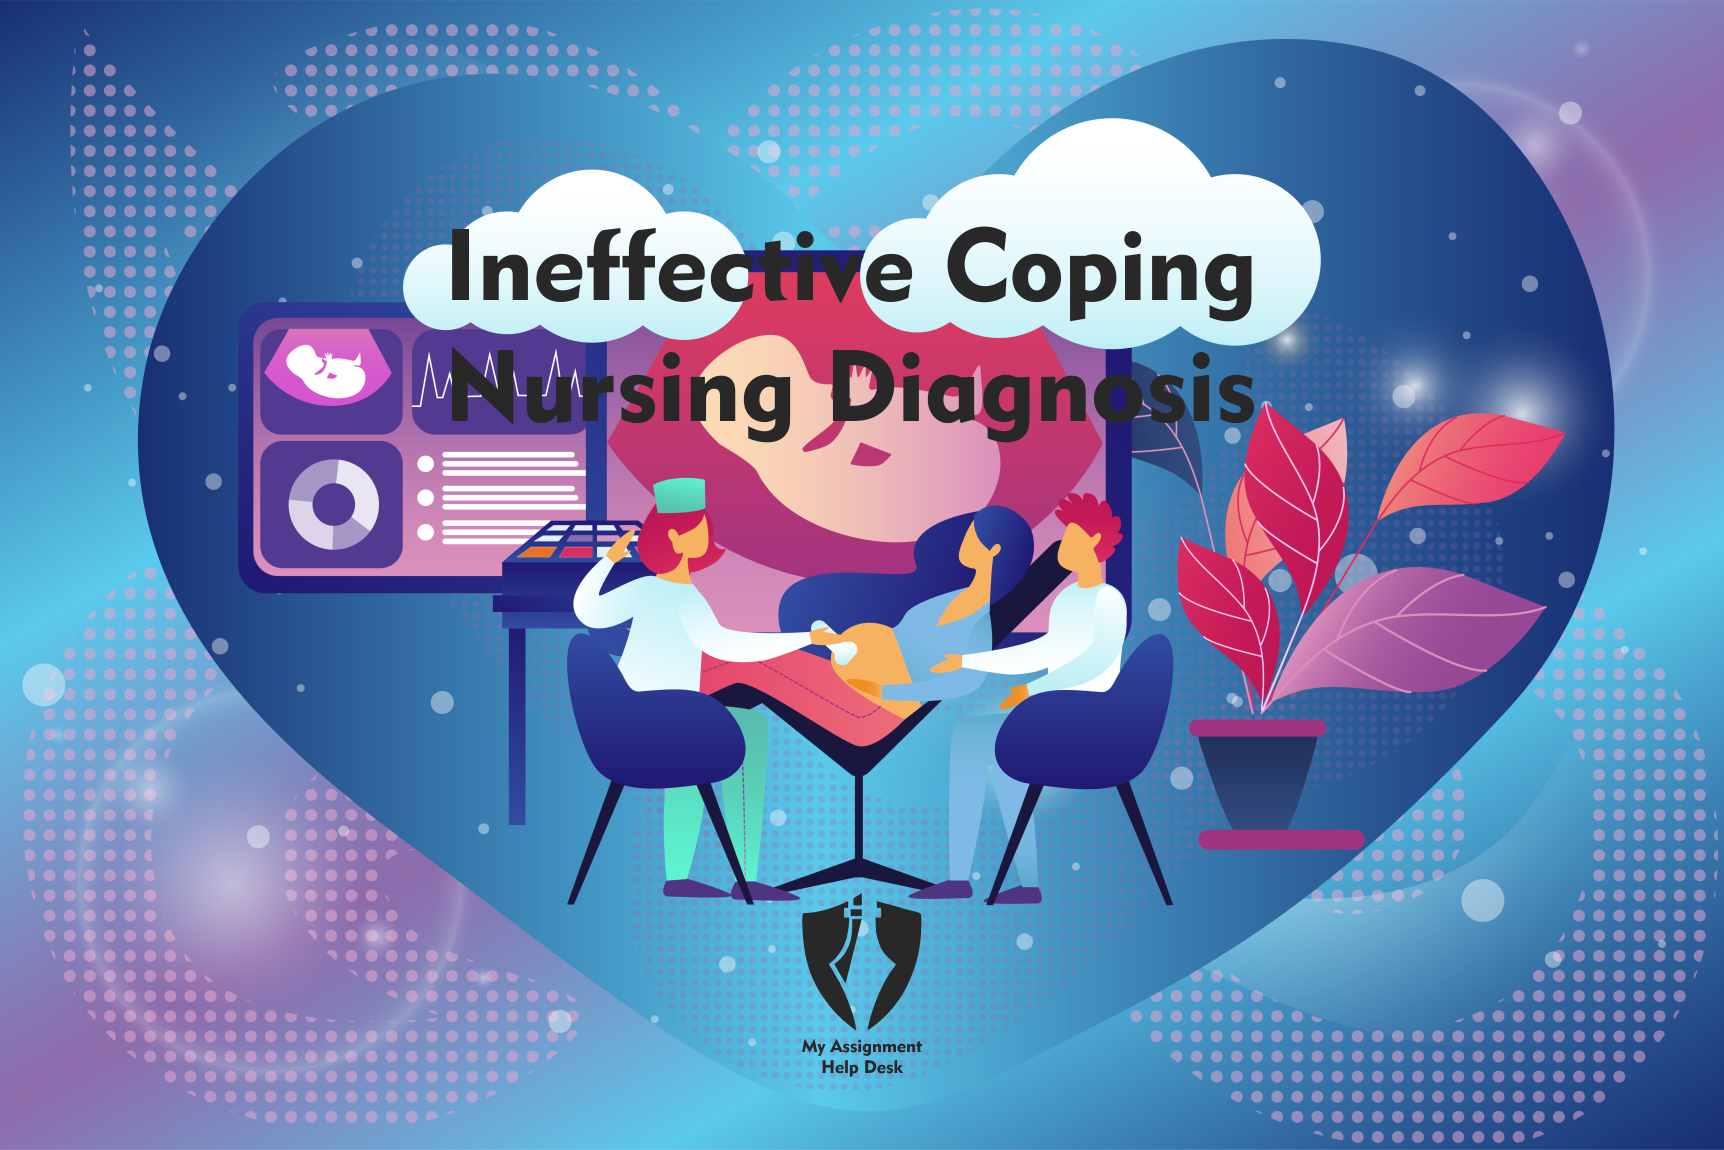 You are currently viewing Ineffective Coping Nursing Diagnosis